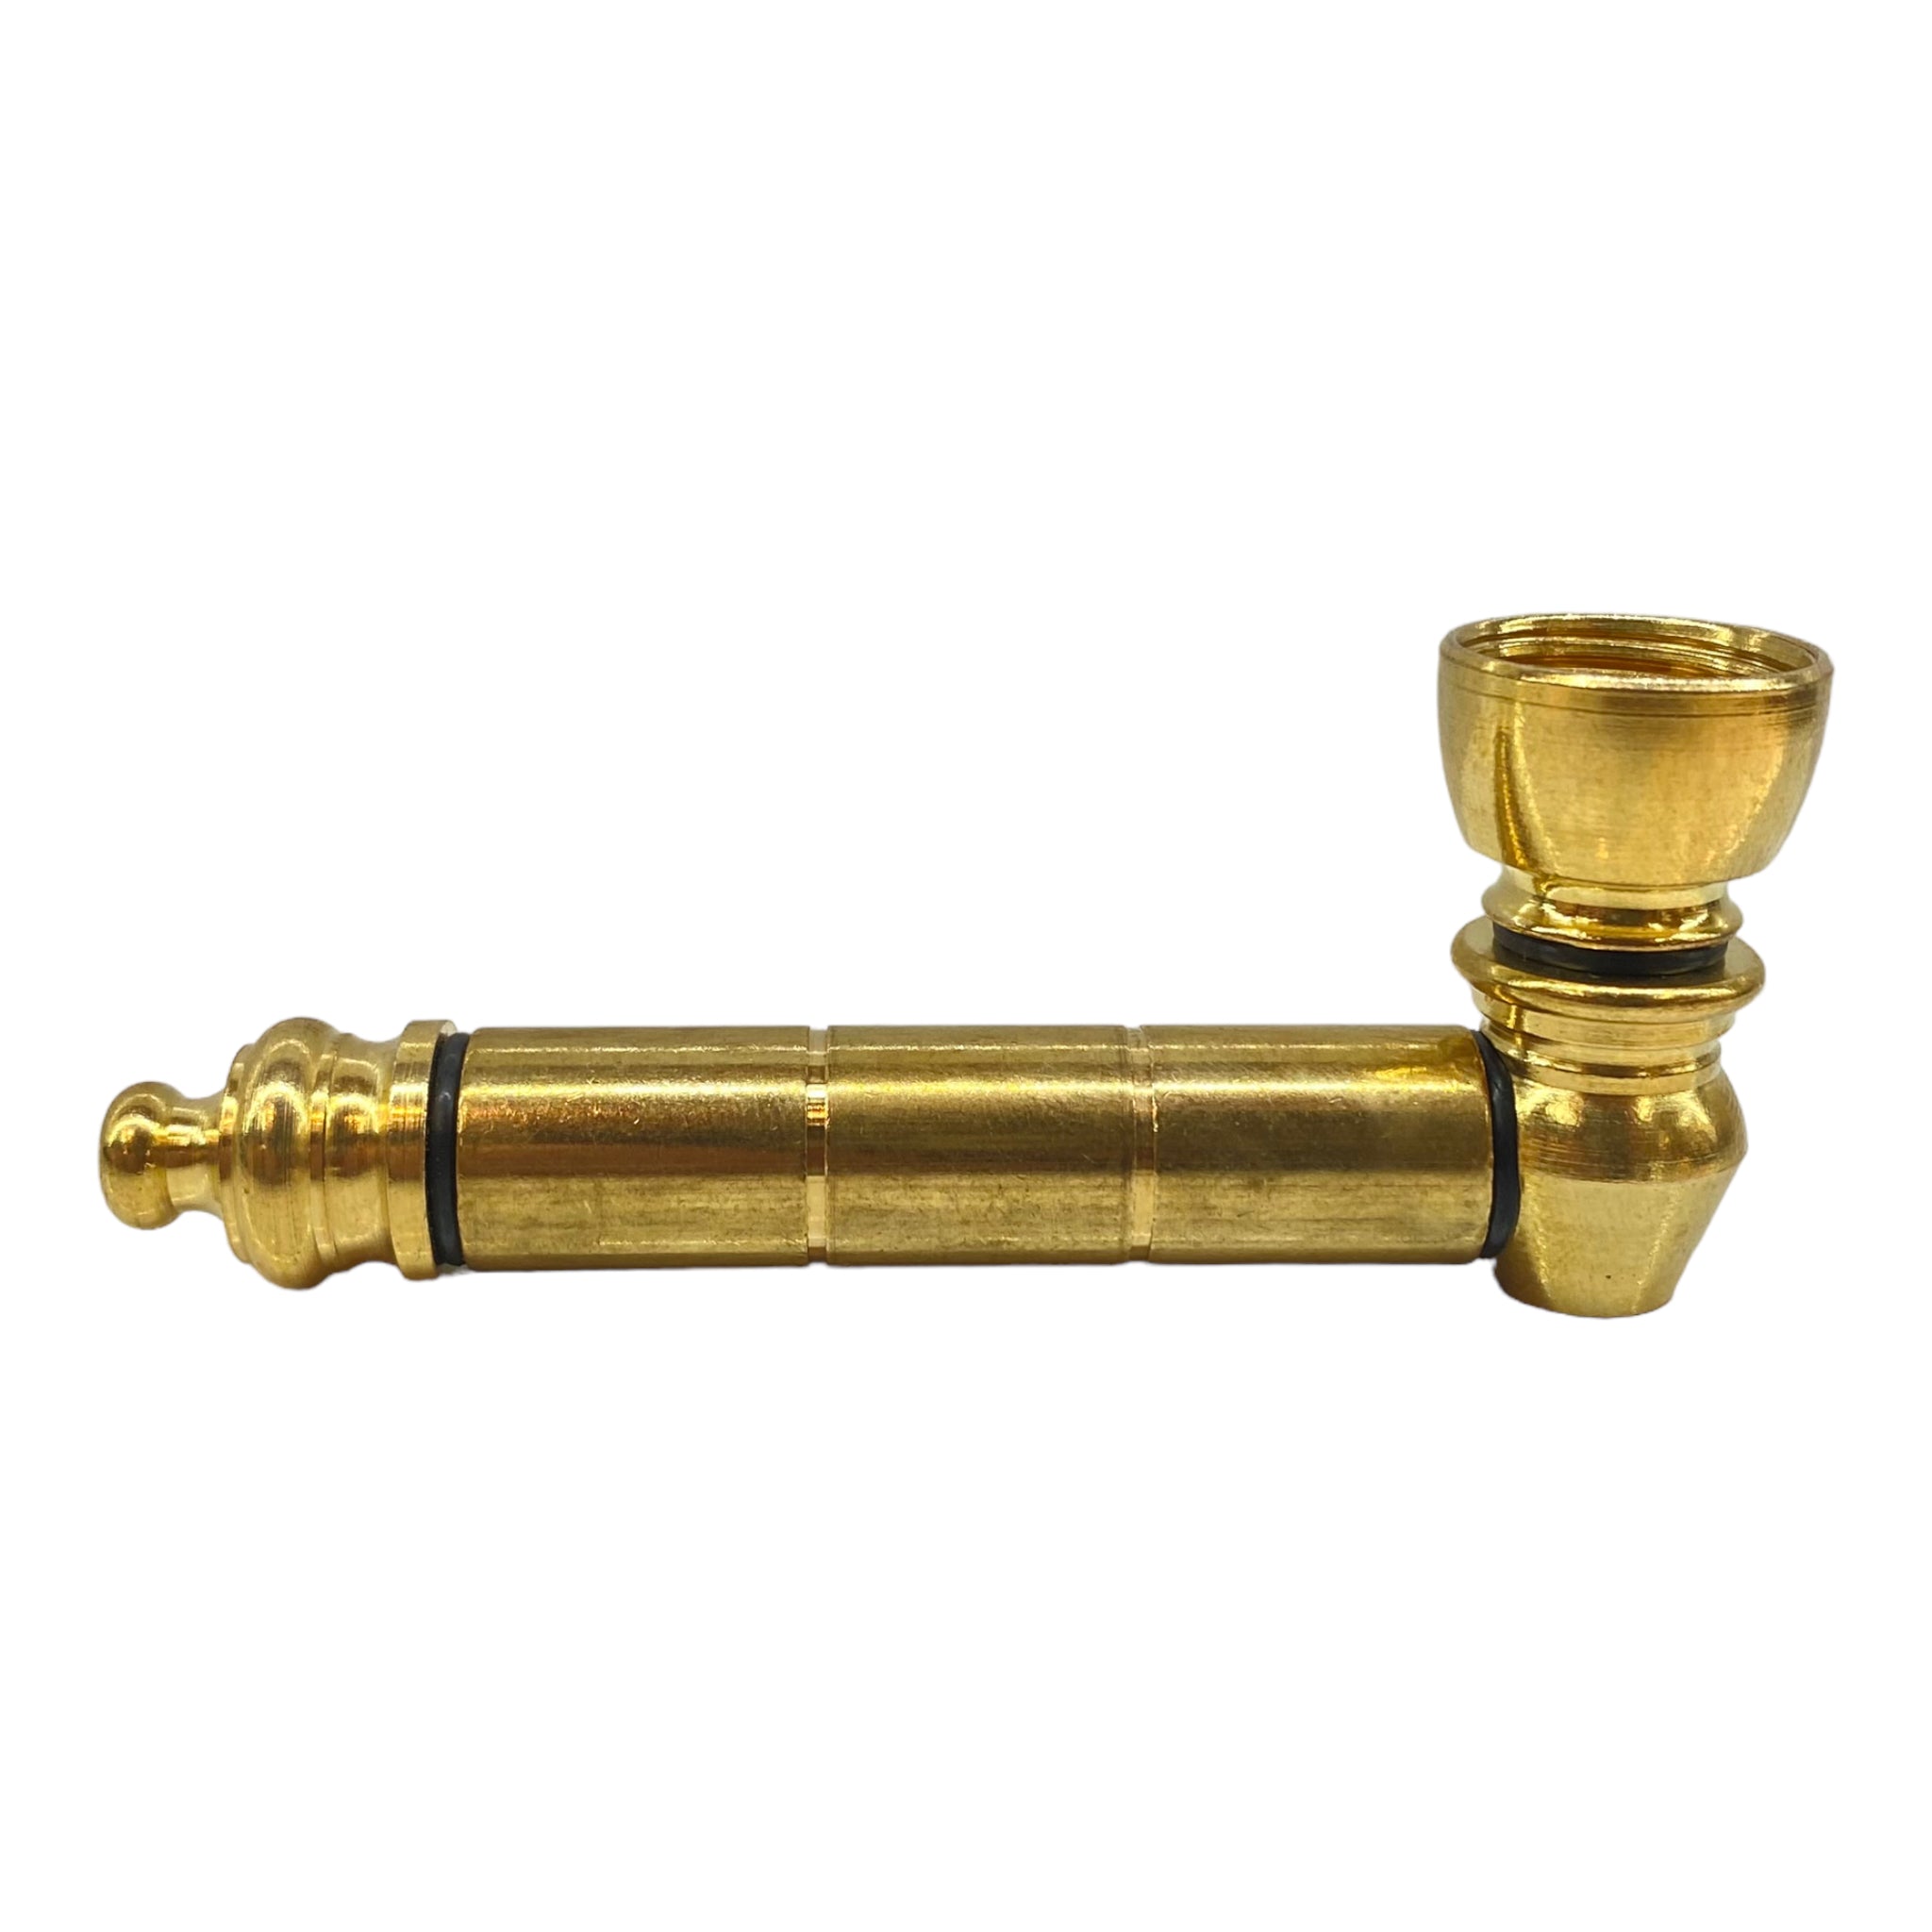 Metal Hand Pipes - Gold Basic Brass Metal Pipe With Small Chamber